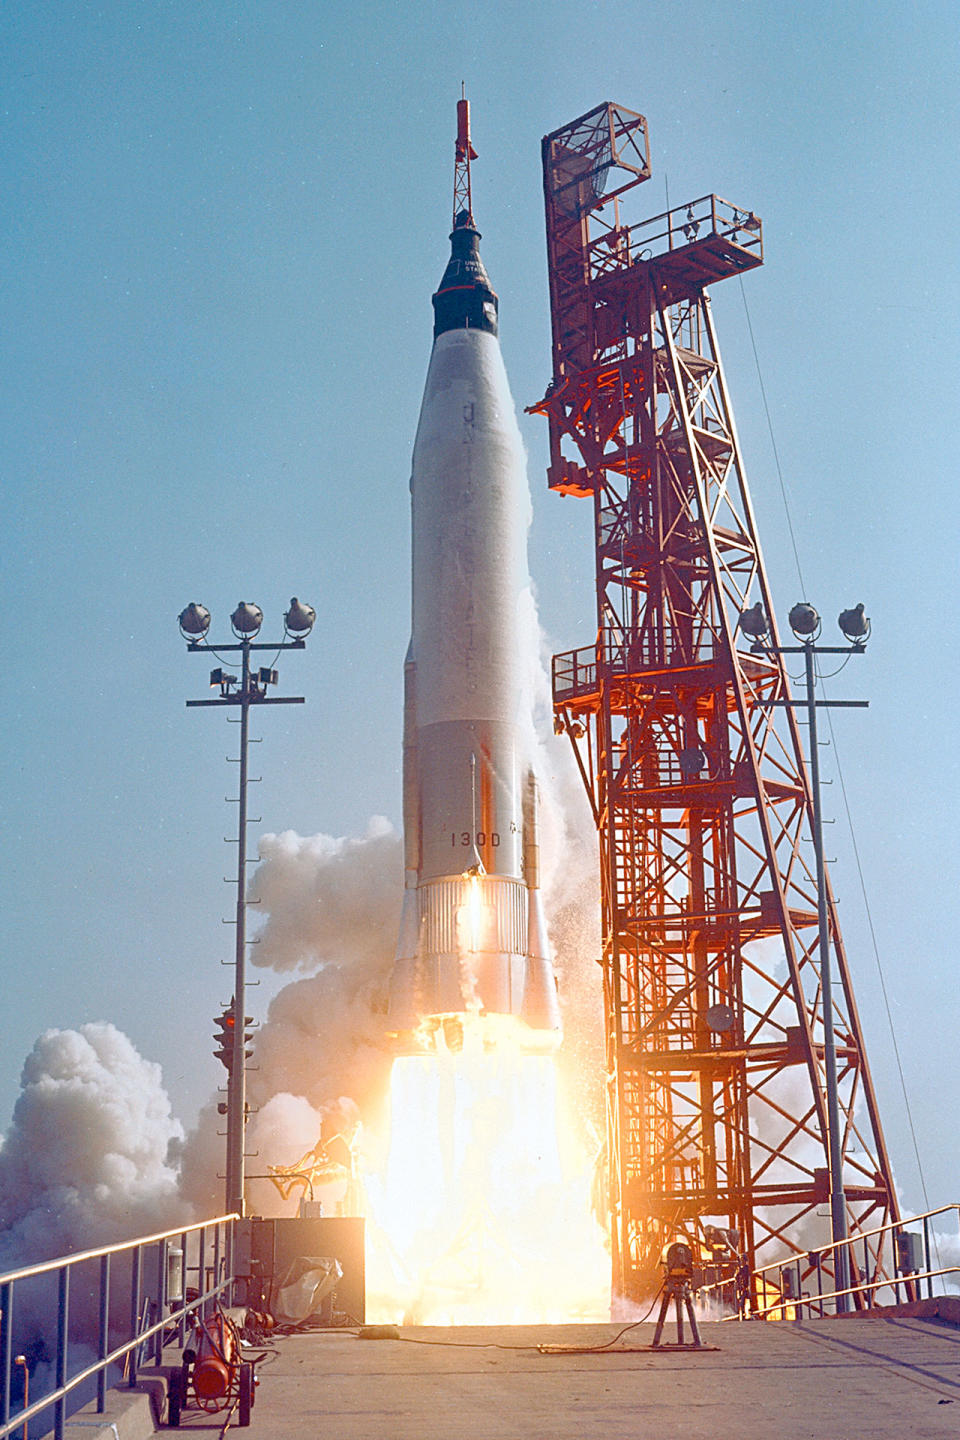 close-up photo of a white rocket launching into the blue sky